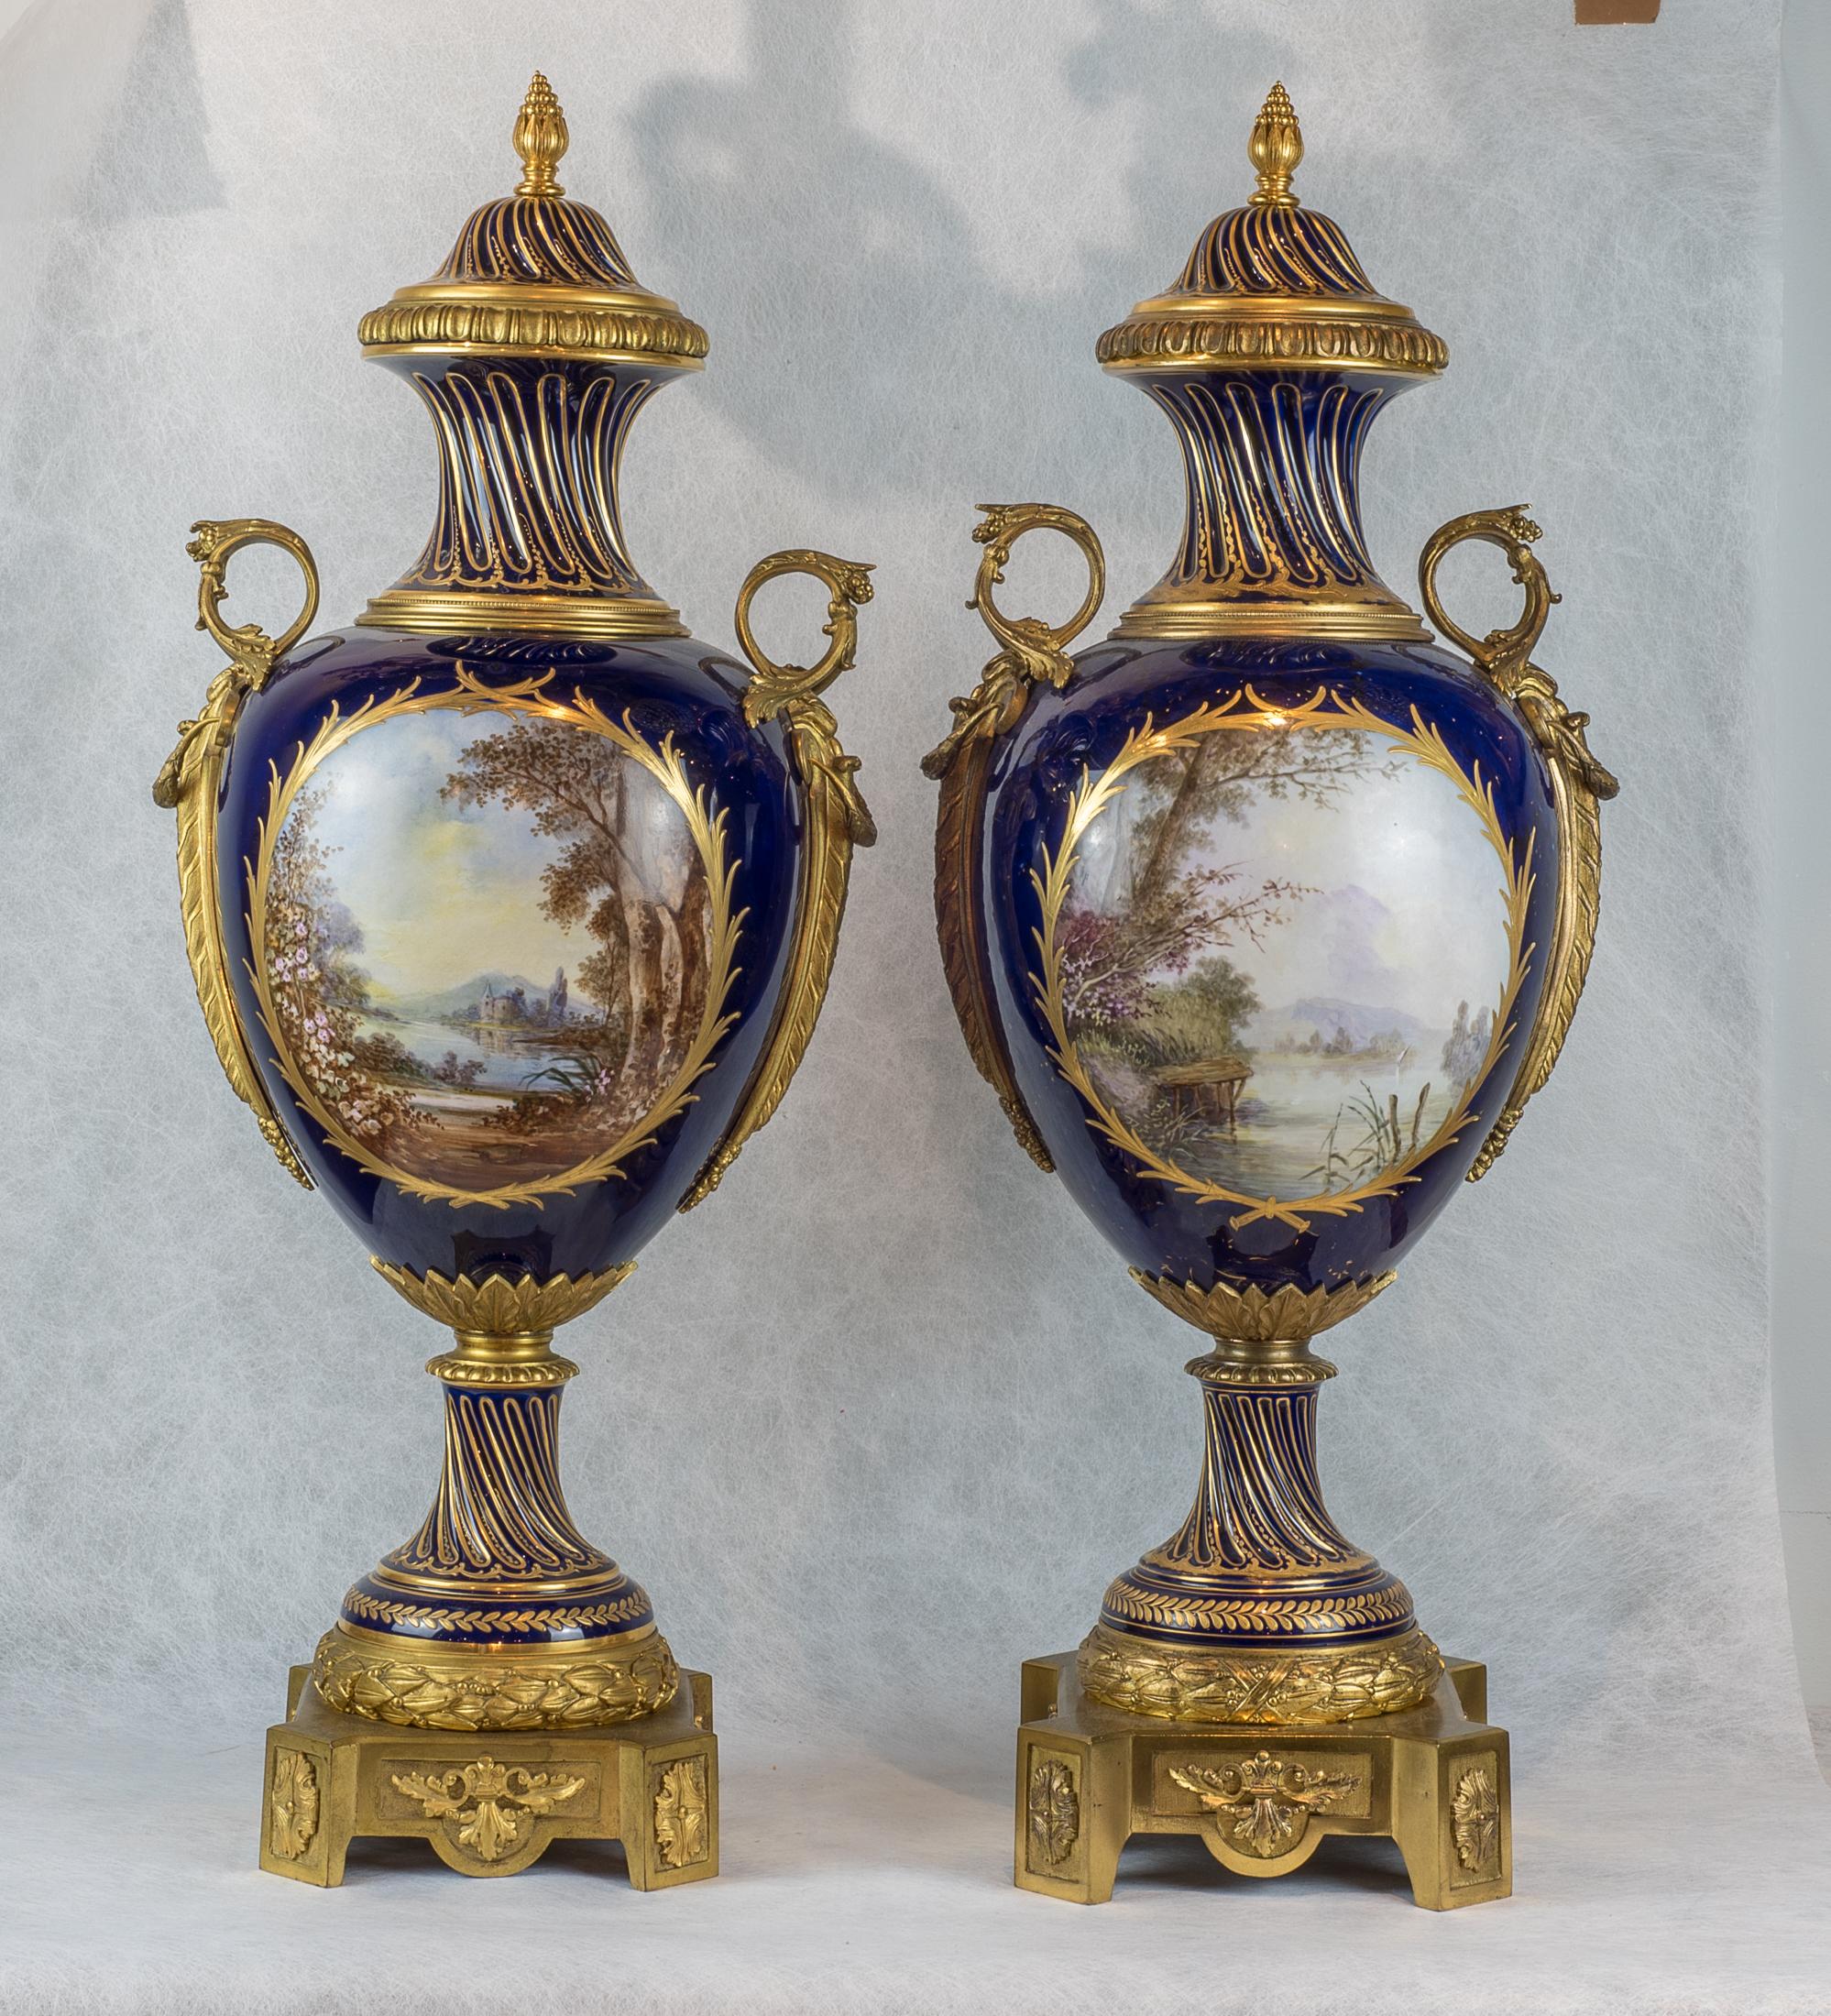 A fine quality pair of large French gilt bronze mounted Sèvres style porcelain vases

Each cobalt ground with raised gold gilding, trumpet form neck decorated with figural lovers in the garden, signed by Poitevin.

Origin: French
Date: 19th